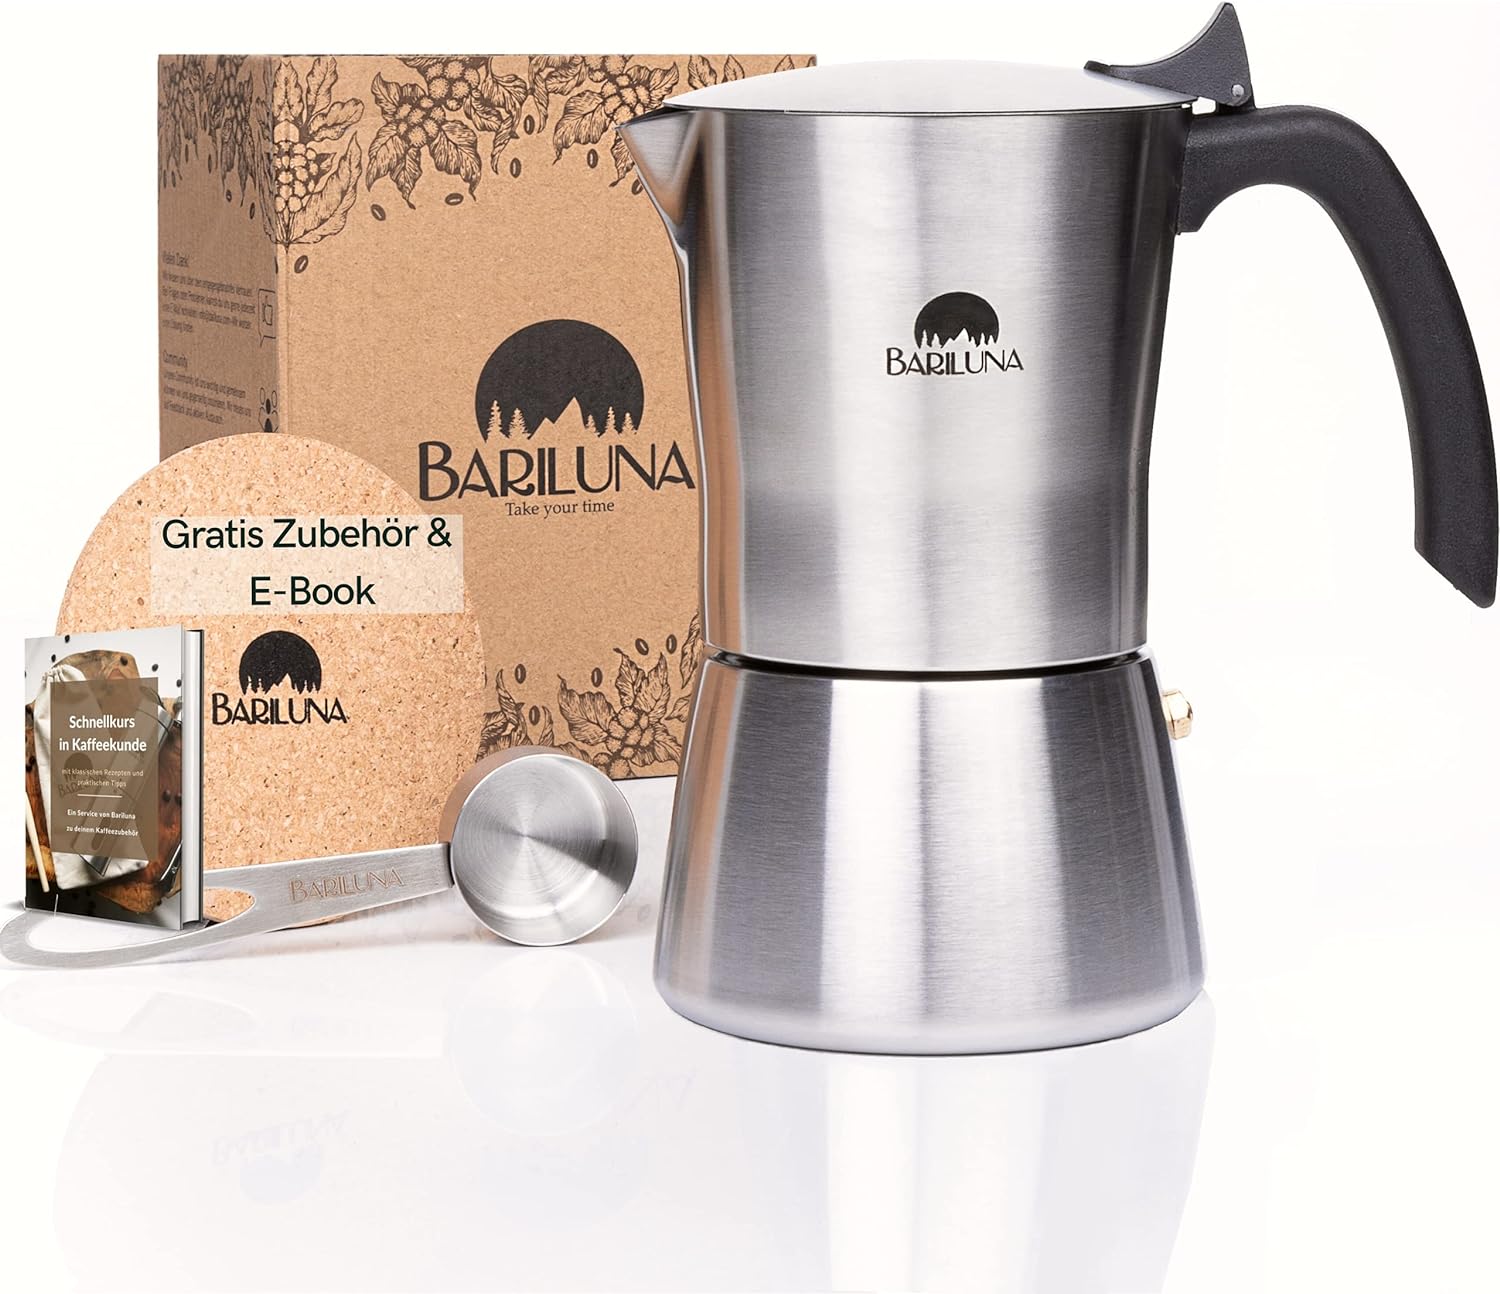 Bariluna® Premium Stainless Steel Espresso Maker, Suitable for Induction Cookers, 4-6 Cups Espresso, 150-300 ml Mocha Cooker, Camping Stove, Coffee Maker with Accessories, Aluminum Free for Coffee (6